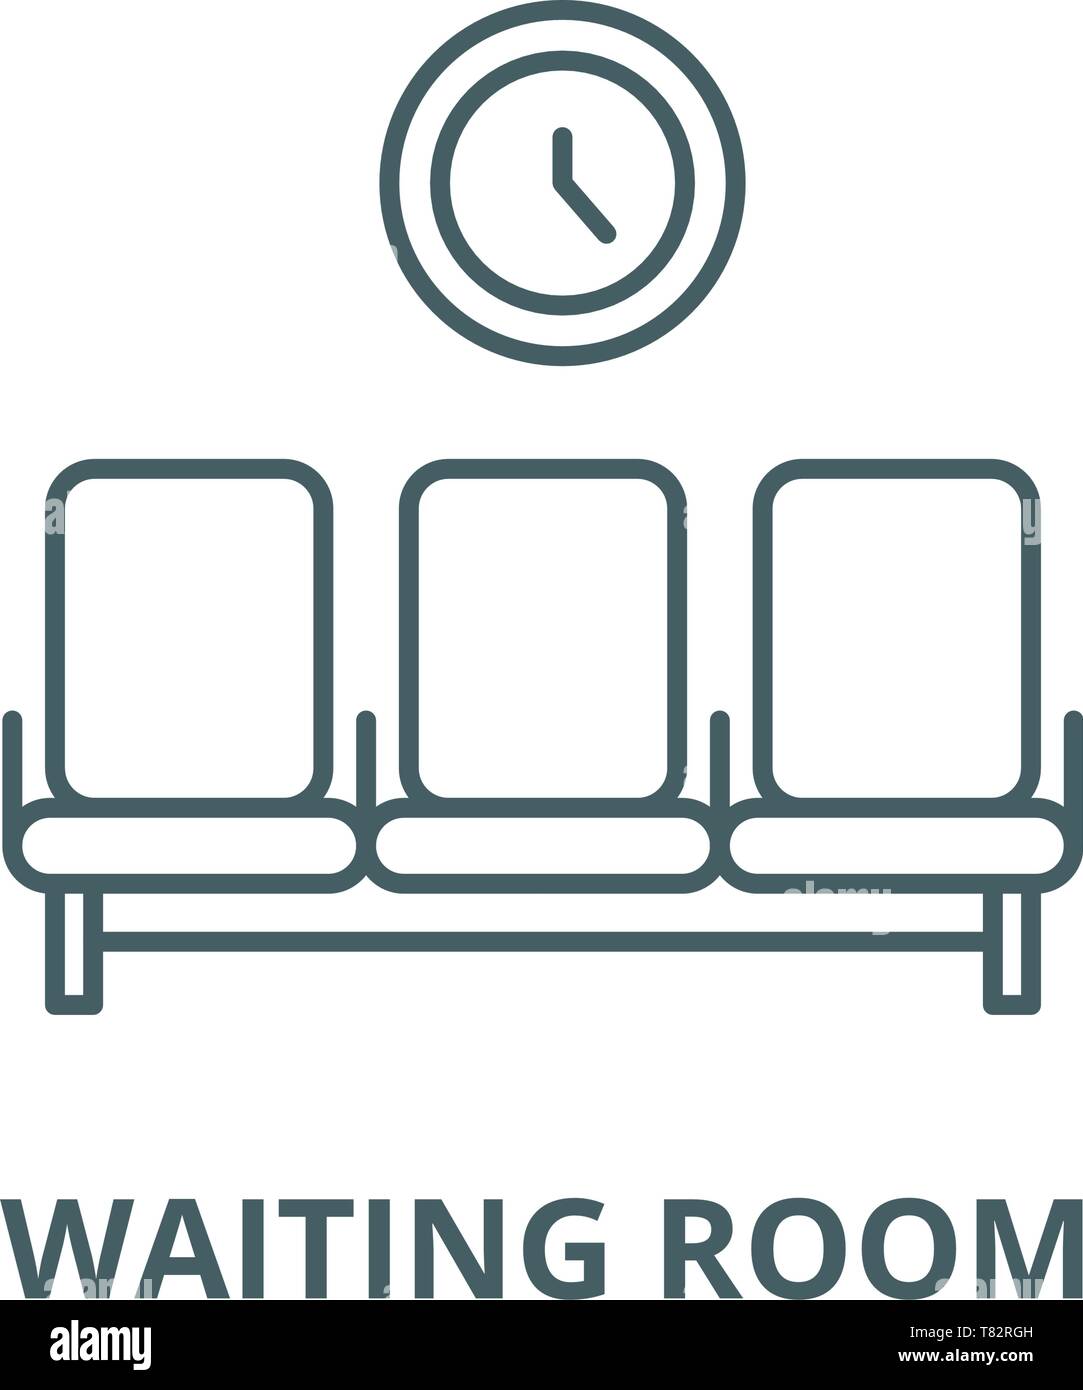 Waiting room vector line icon, linear concept, outline sign, symbol Stock Vector